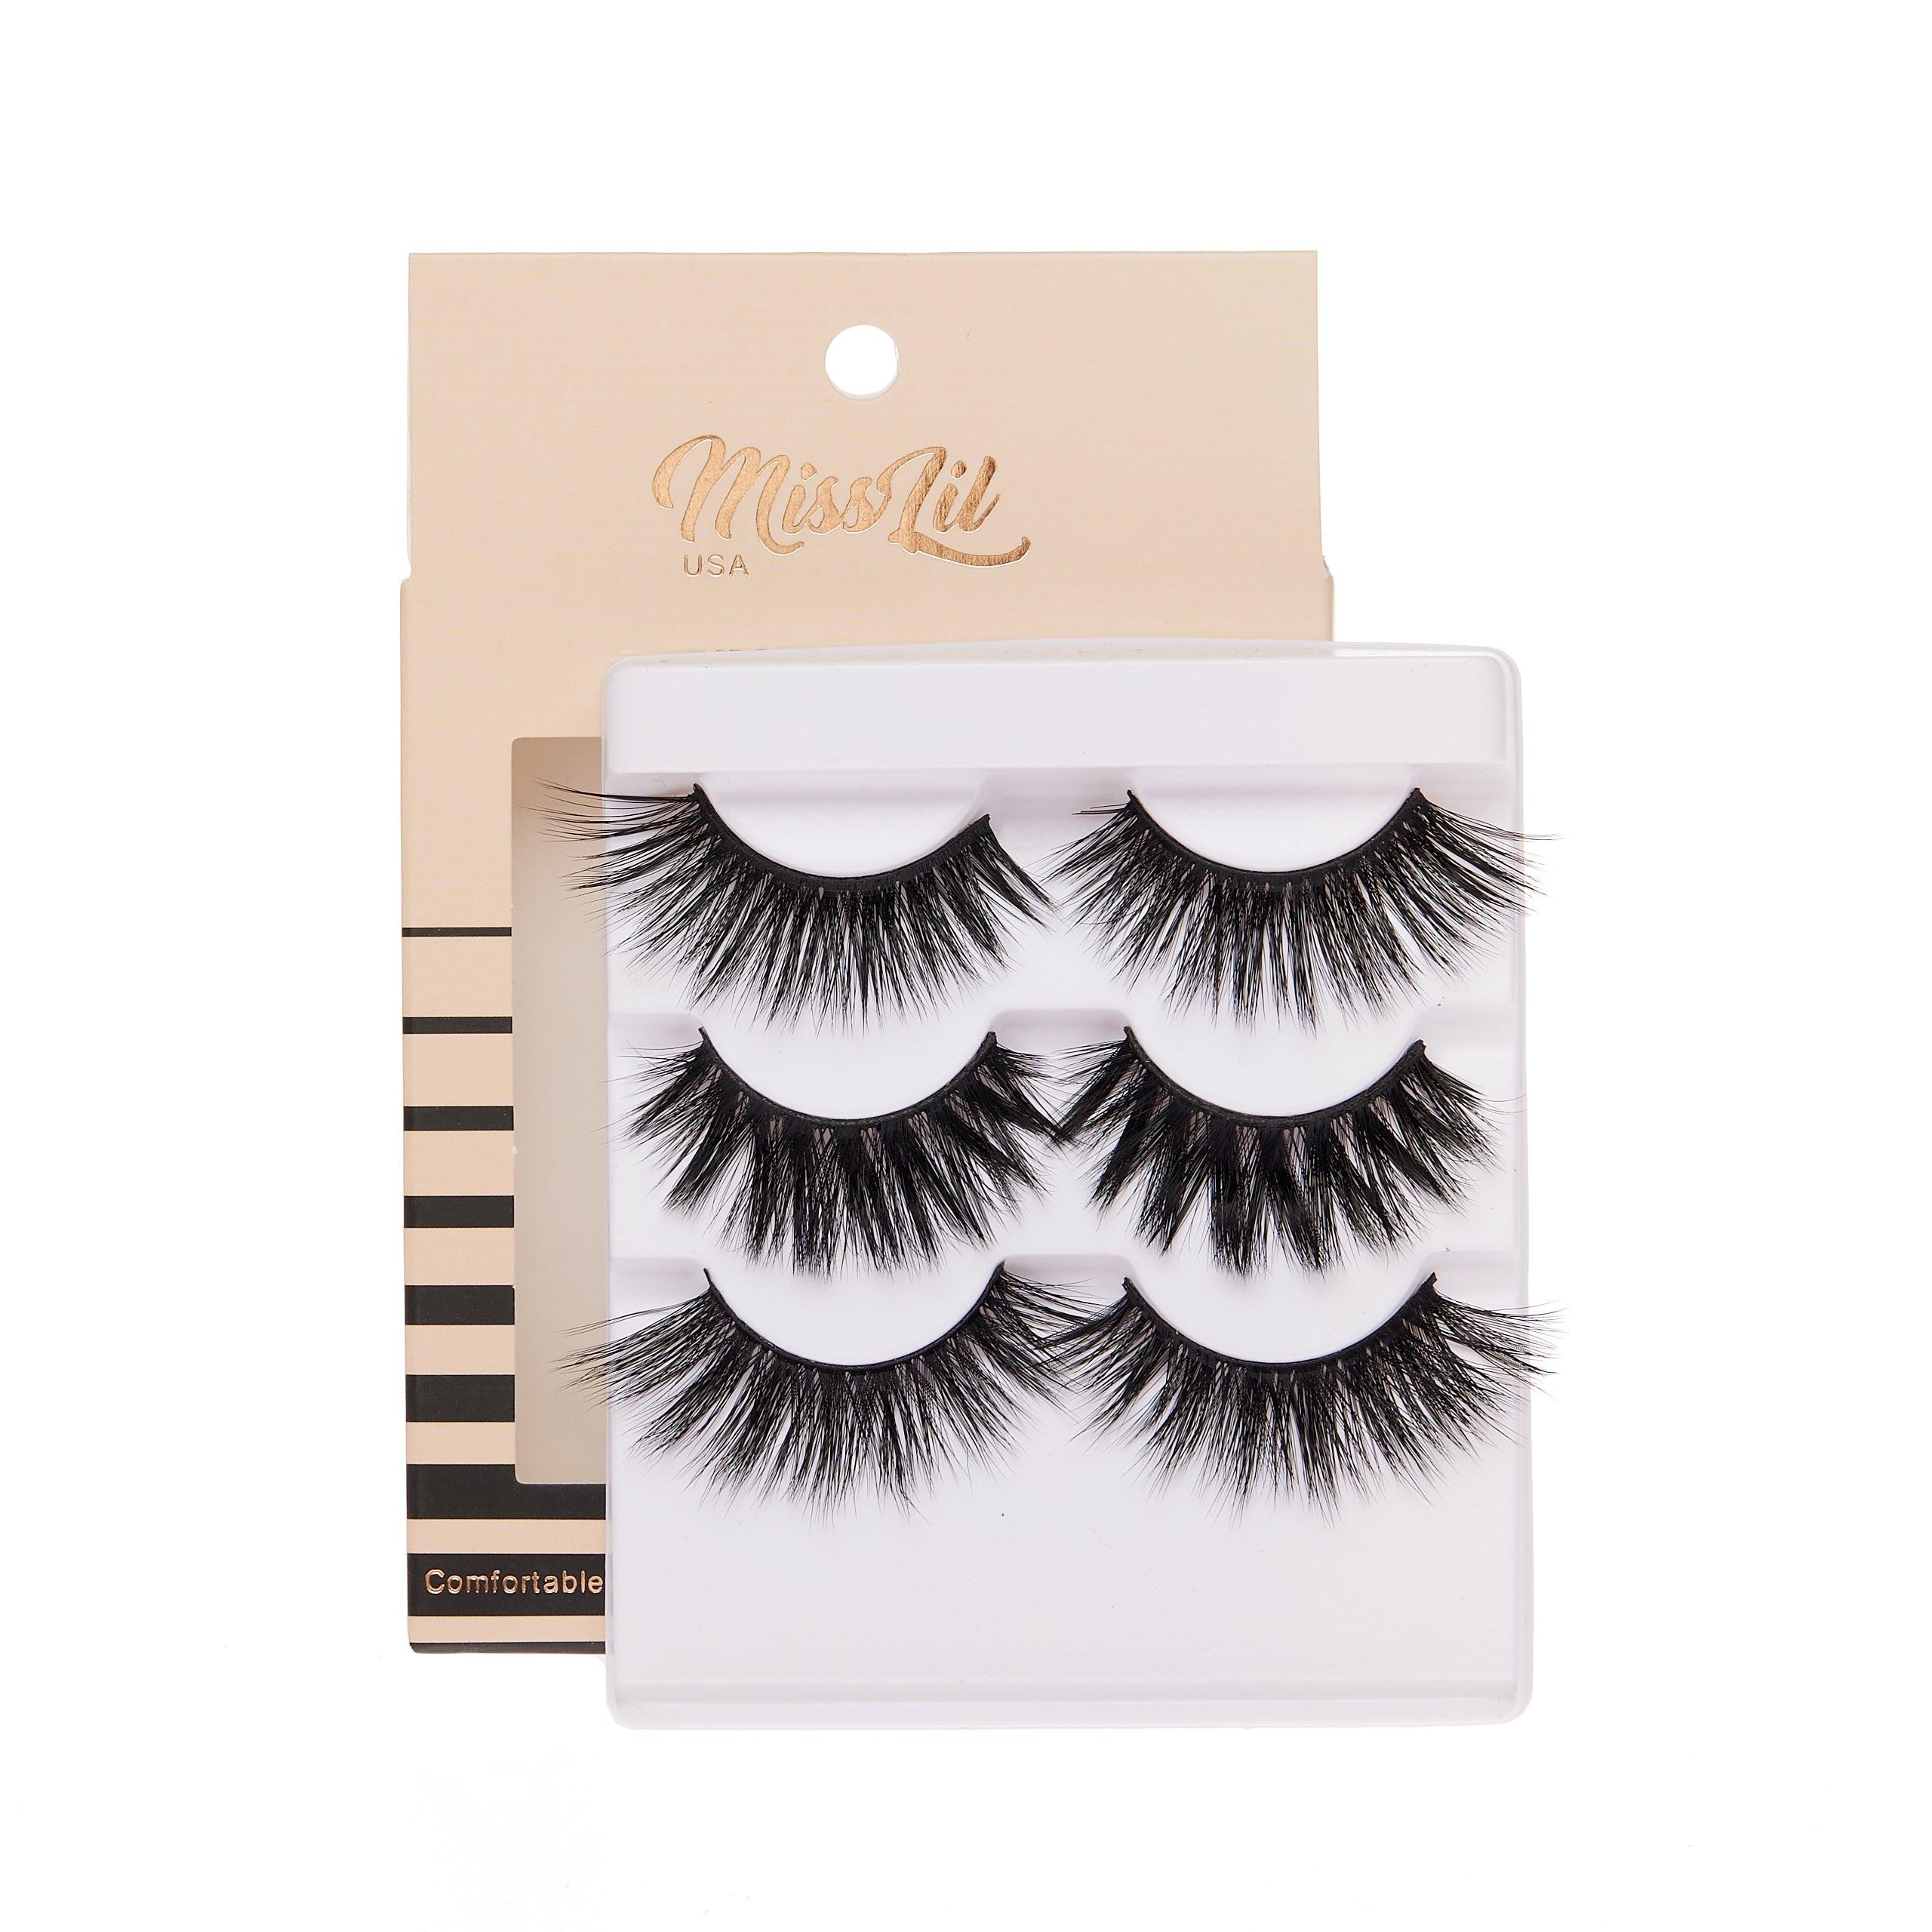 3-Pair Faux 9D Mink Eyelashes - Luxury Collection #5 - Pack of 12 - Miss Lil USA